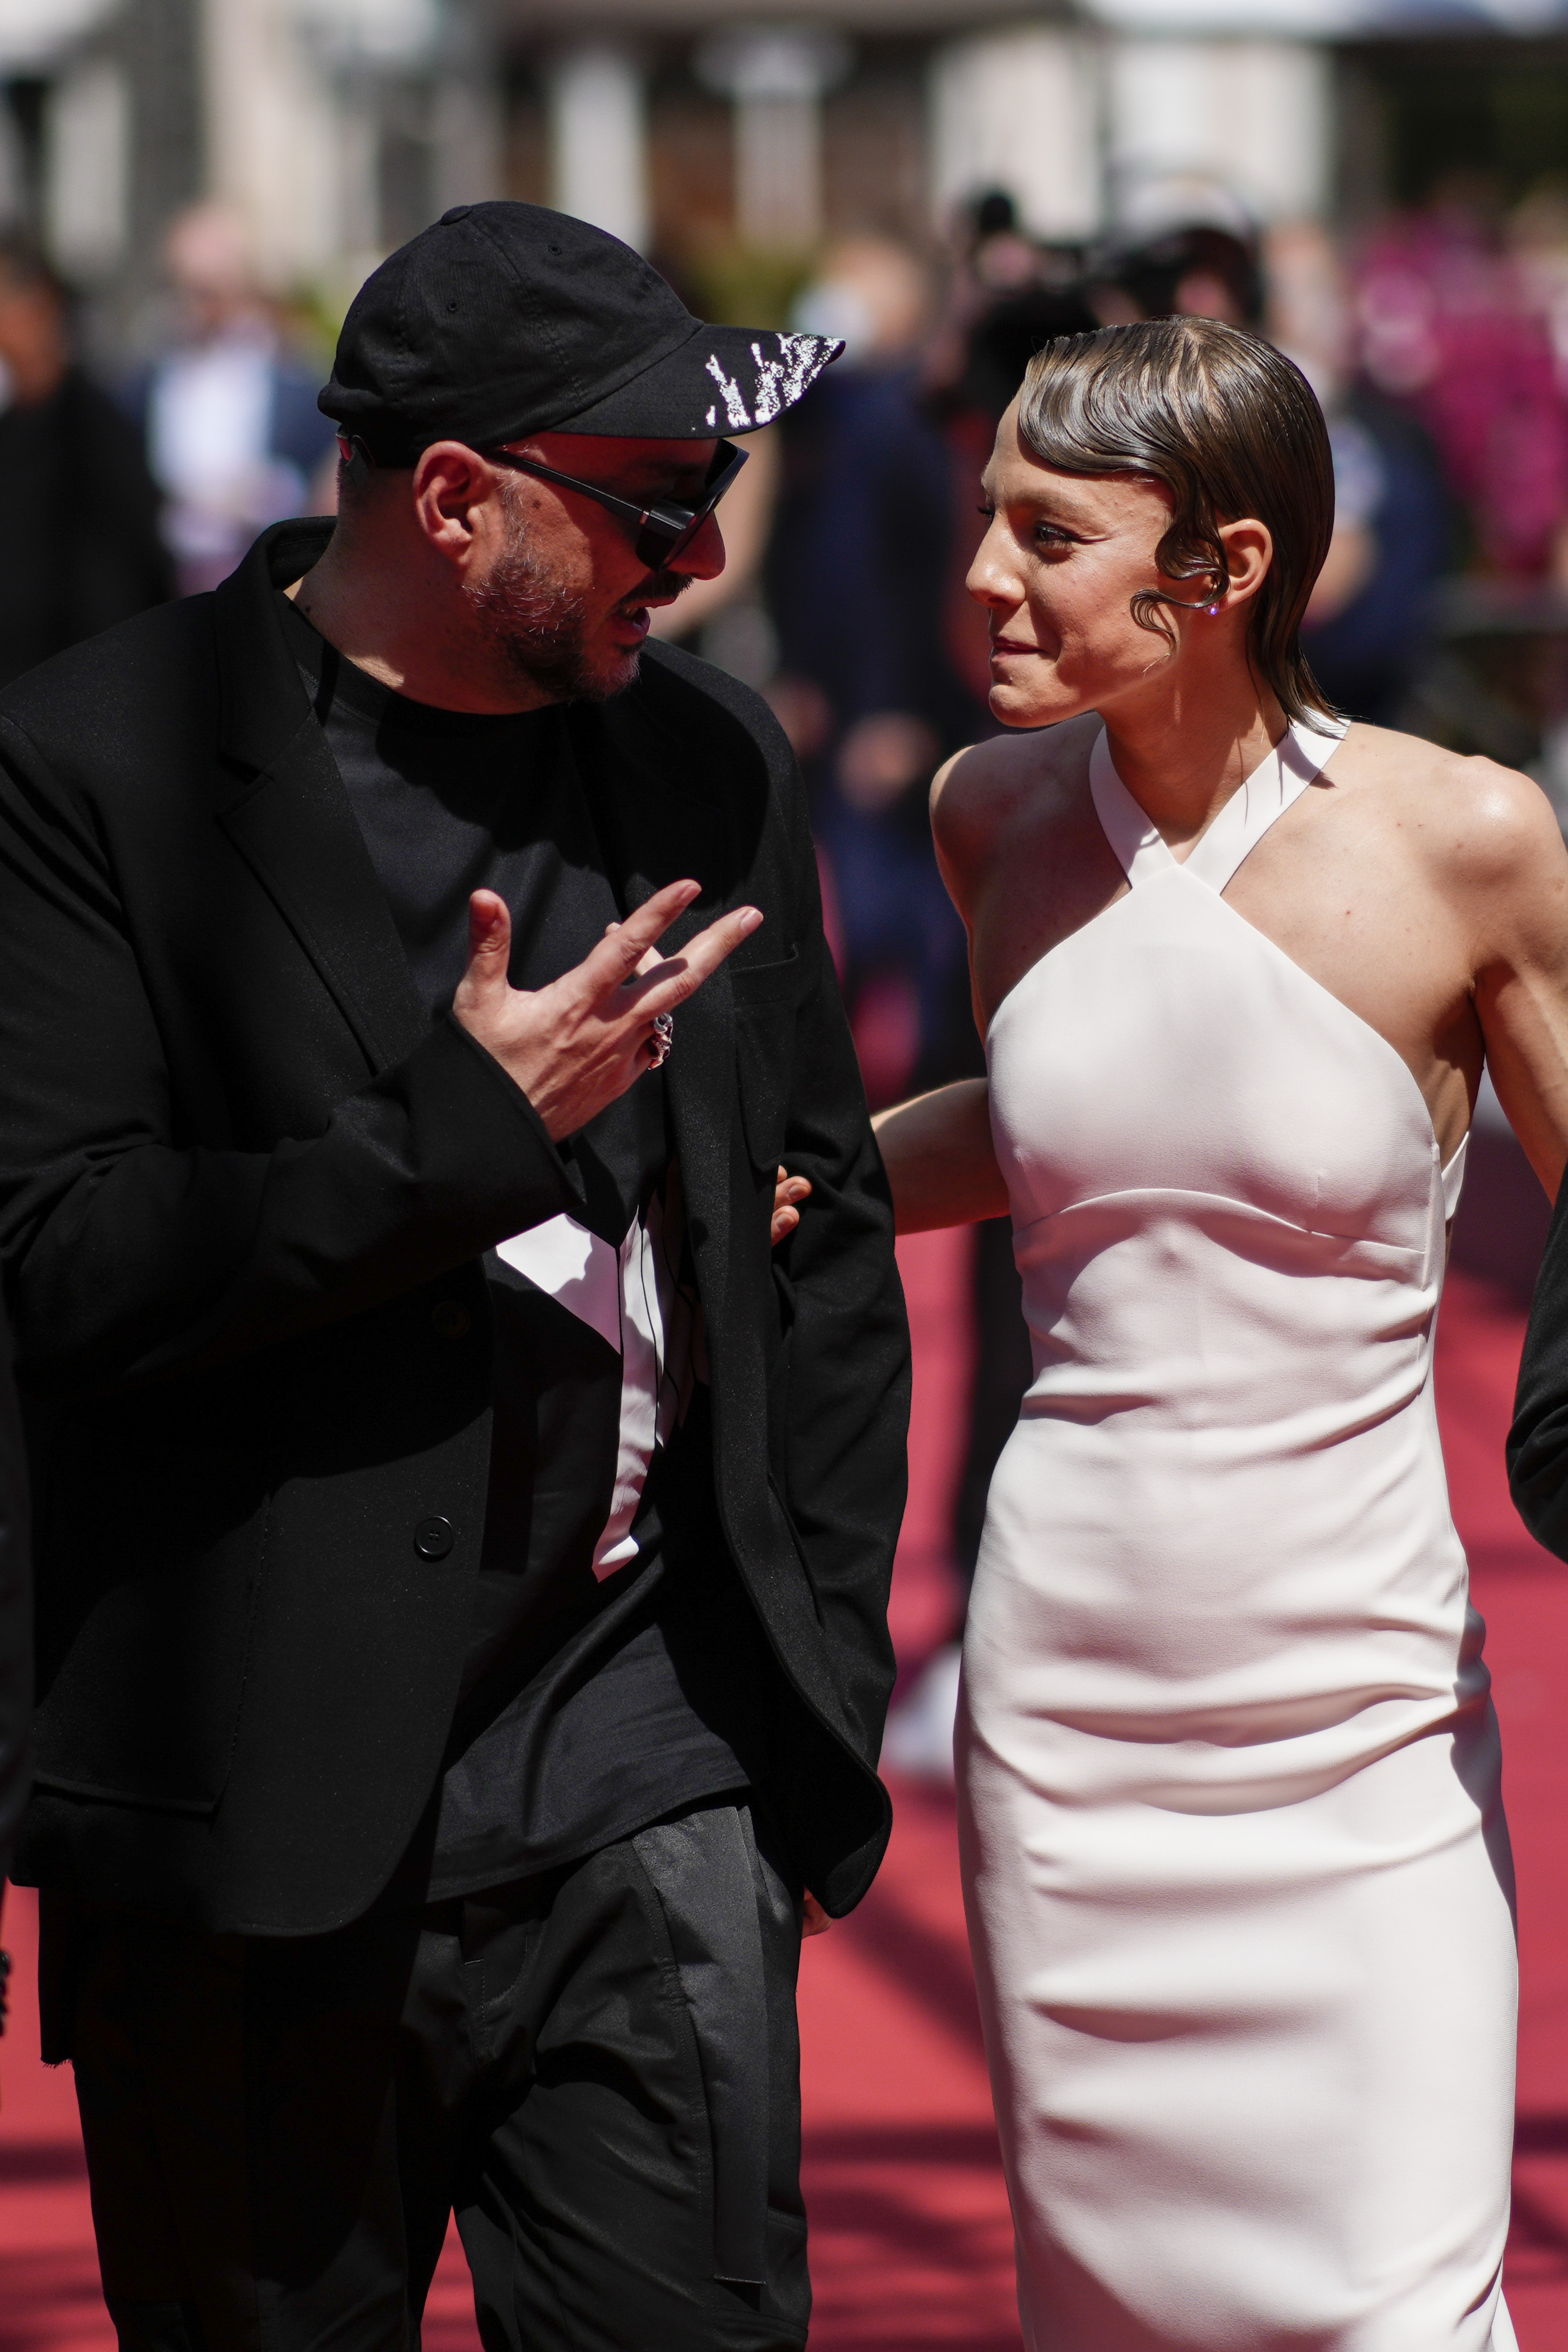 Russian director Kirill Serebrennikov and actress Alyona Mikhailova arrive at the premiere of their film "Tchaikovsky's wife" at the 75th Cannes International Film Festival on Wednesday May 18, 2022 in Cannes, France.  (AP Photo/Daniel Cole)